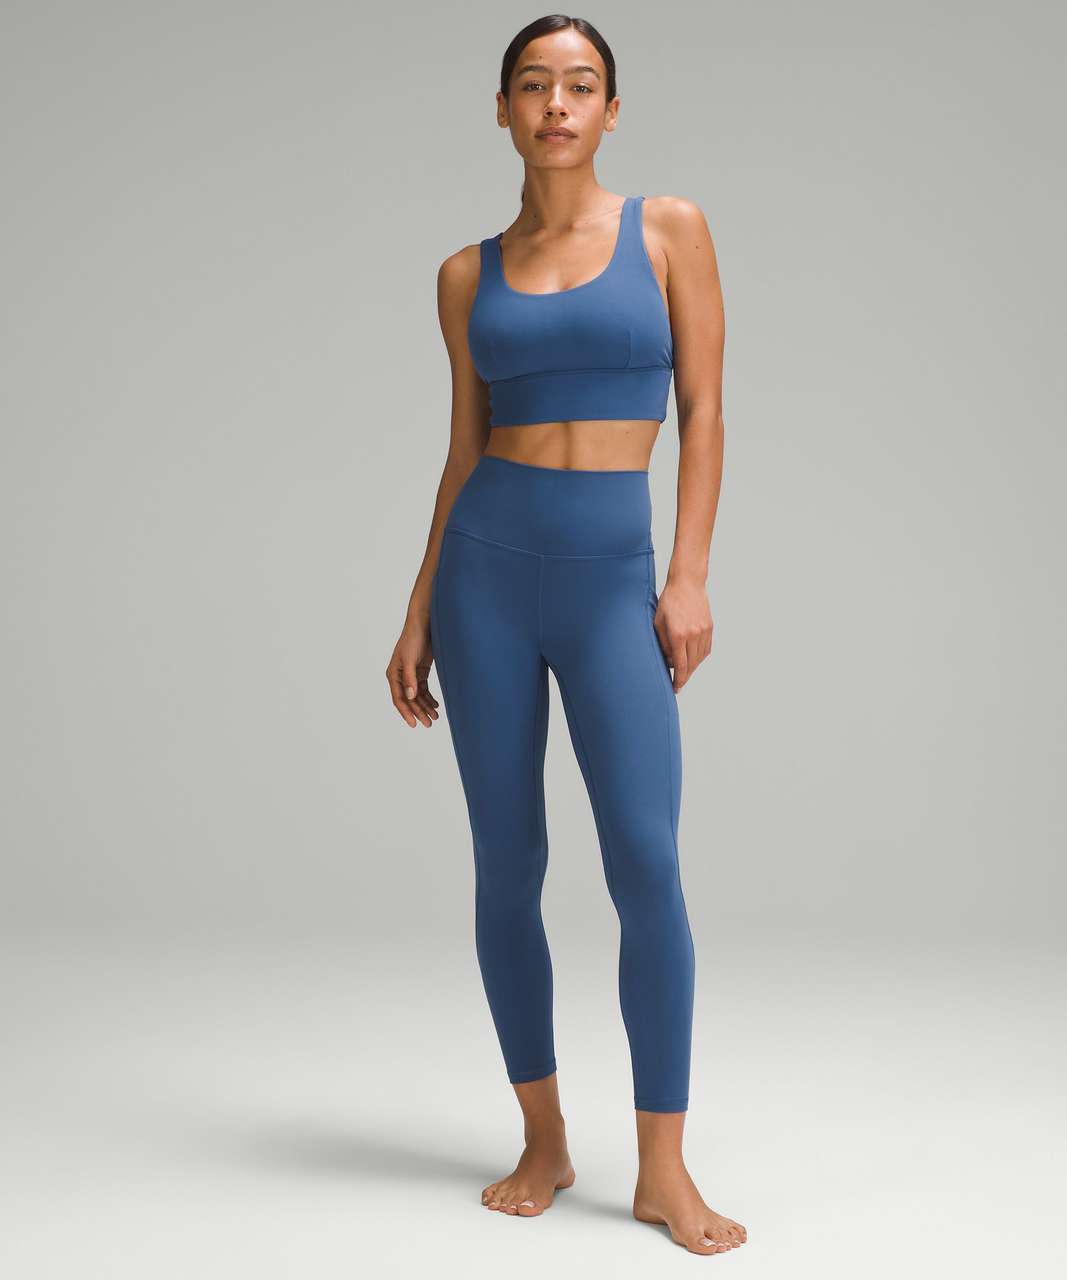 Track lululemon Align™ High-Rise Pant with Pockets 25 - Pitch Blue 